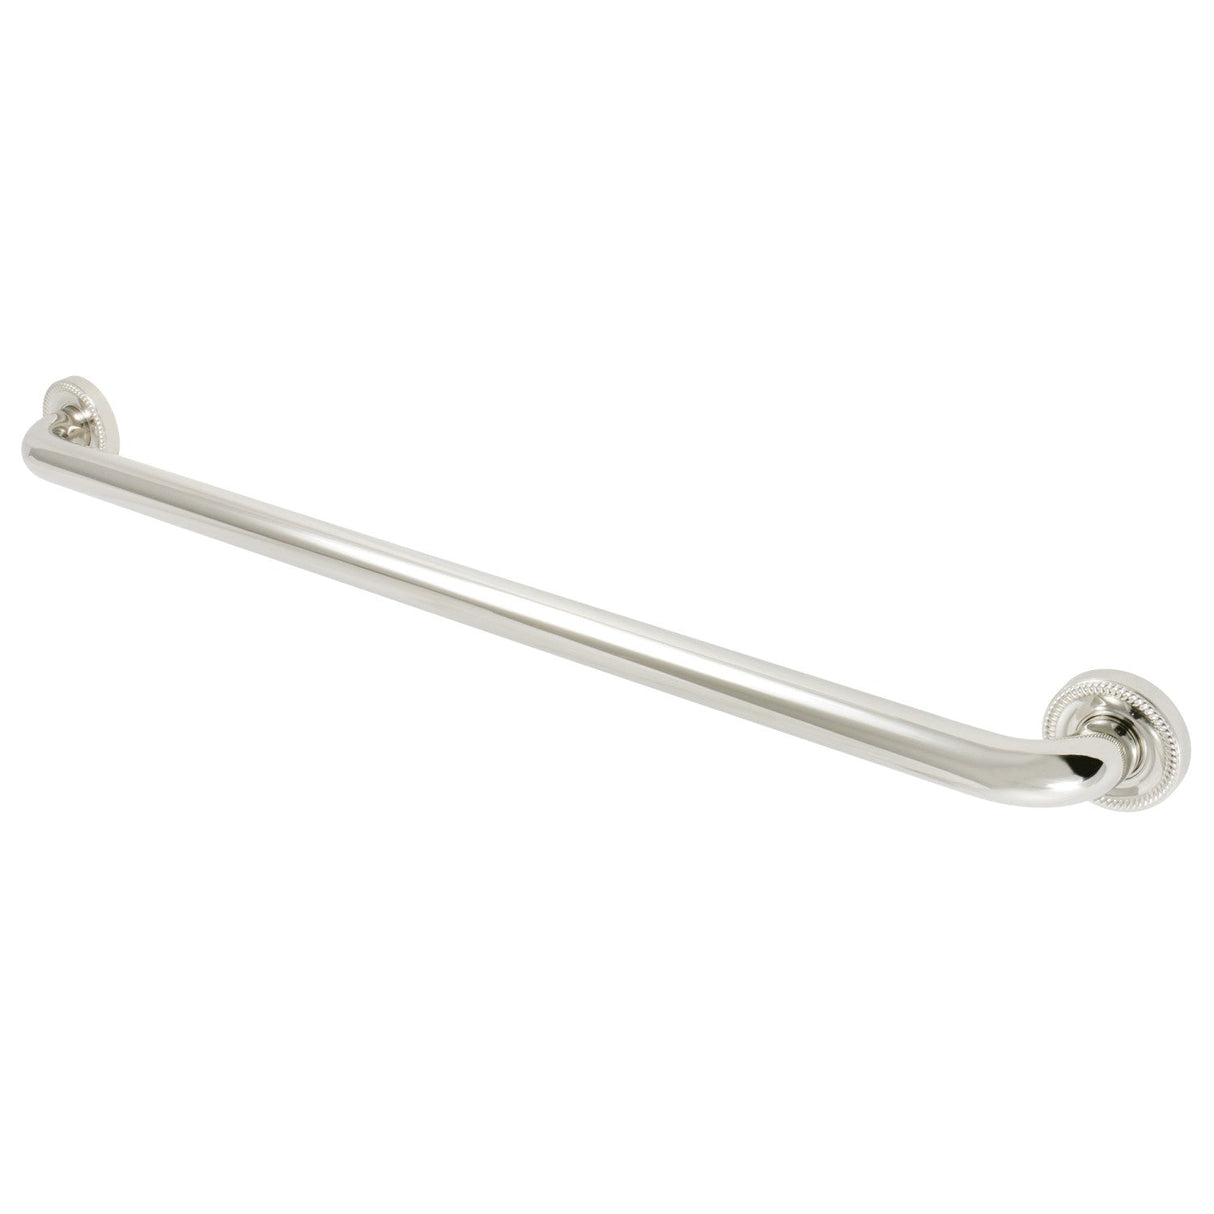 Camelon Thrive In Place DR914306 30-Inch x 1-1/4 Inch O.D Grab Bar, Polished Nickel